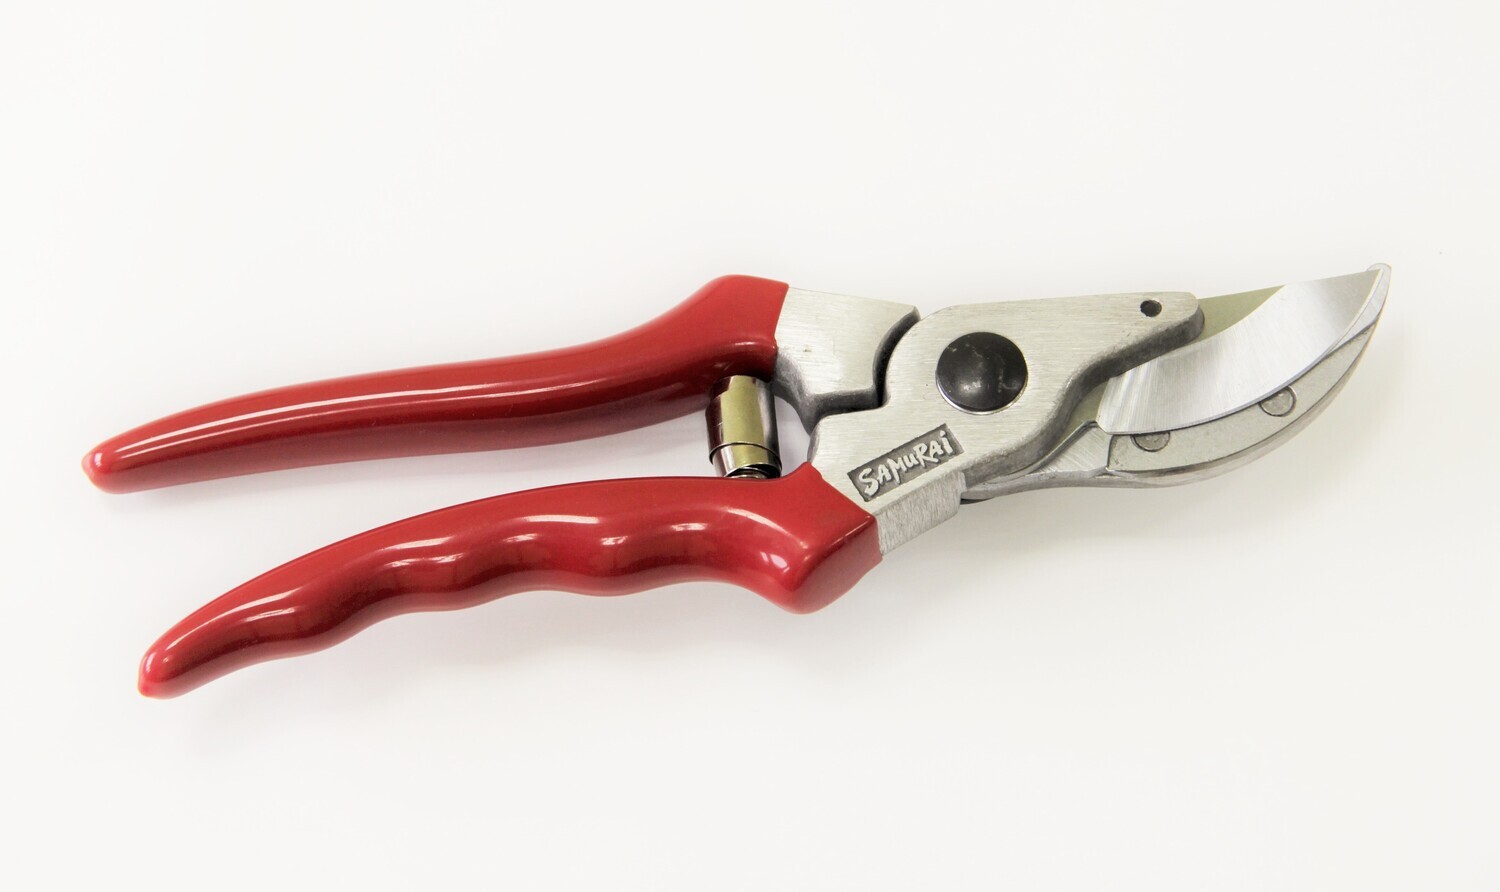 Secateurs with a chrome-plated blade